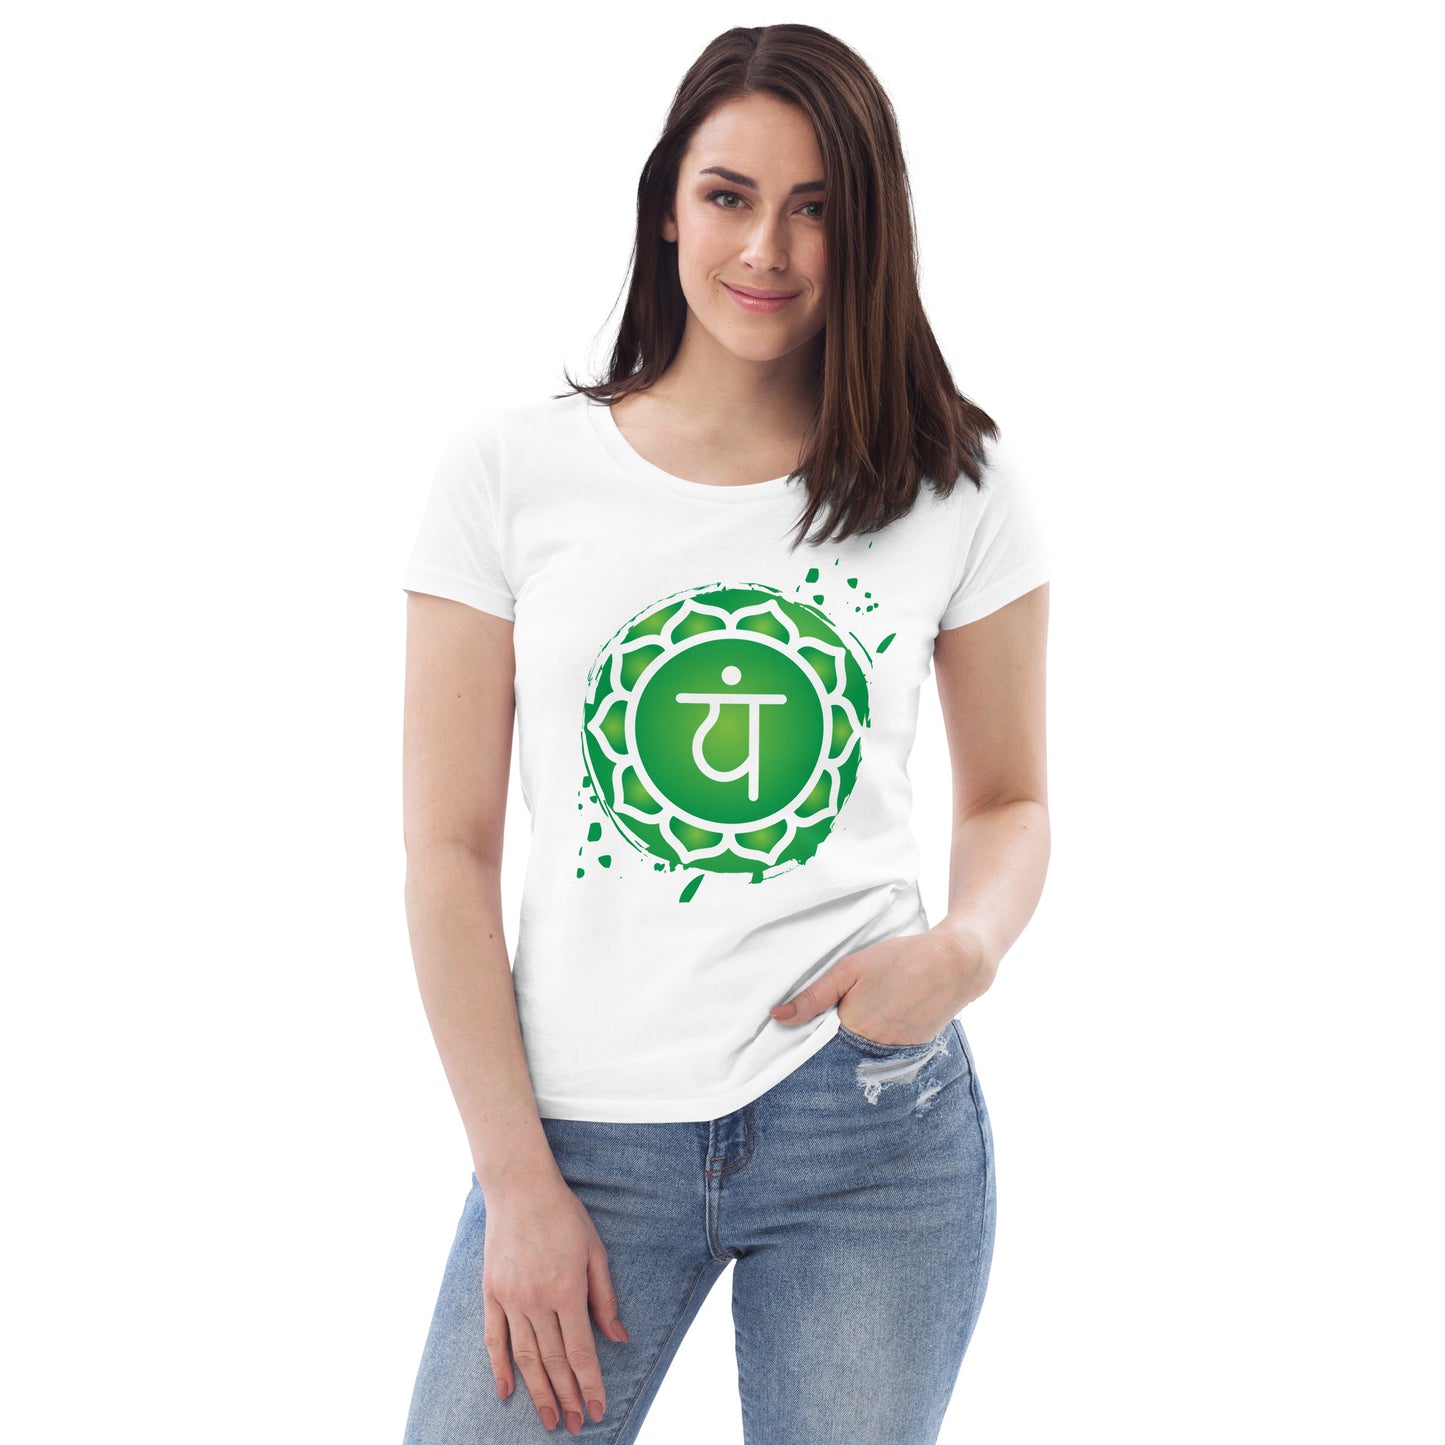 Women's fitted eco tee S-2XL | Anahata chakra